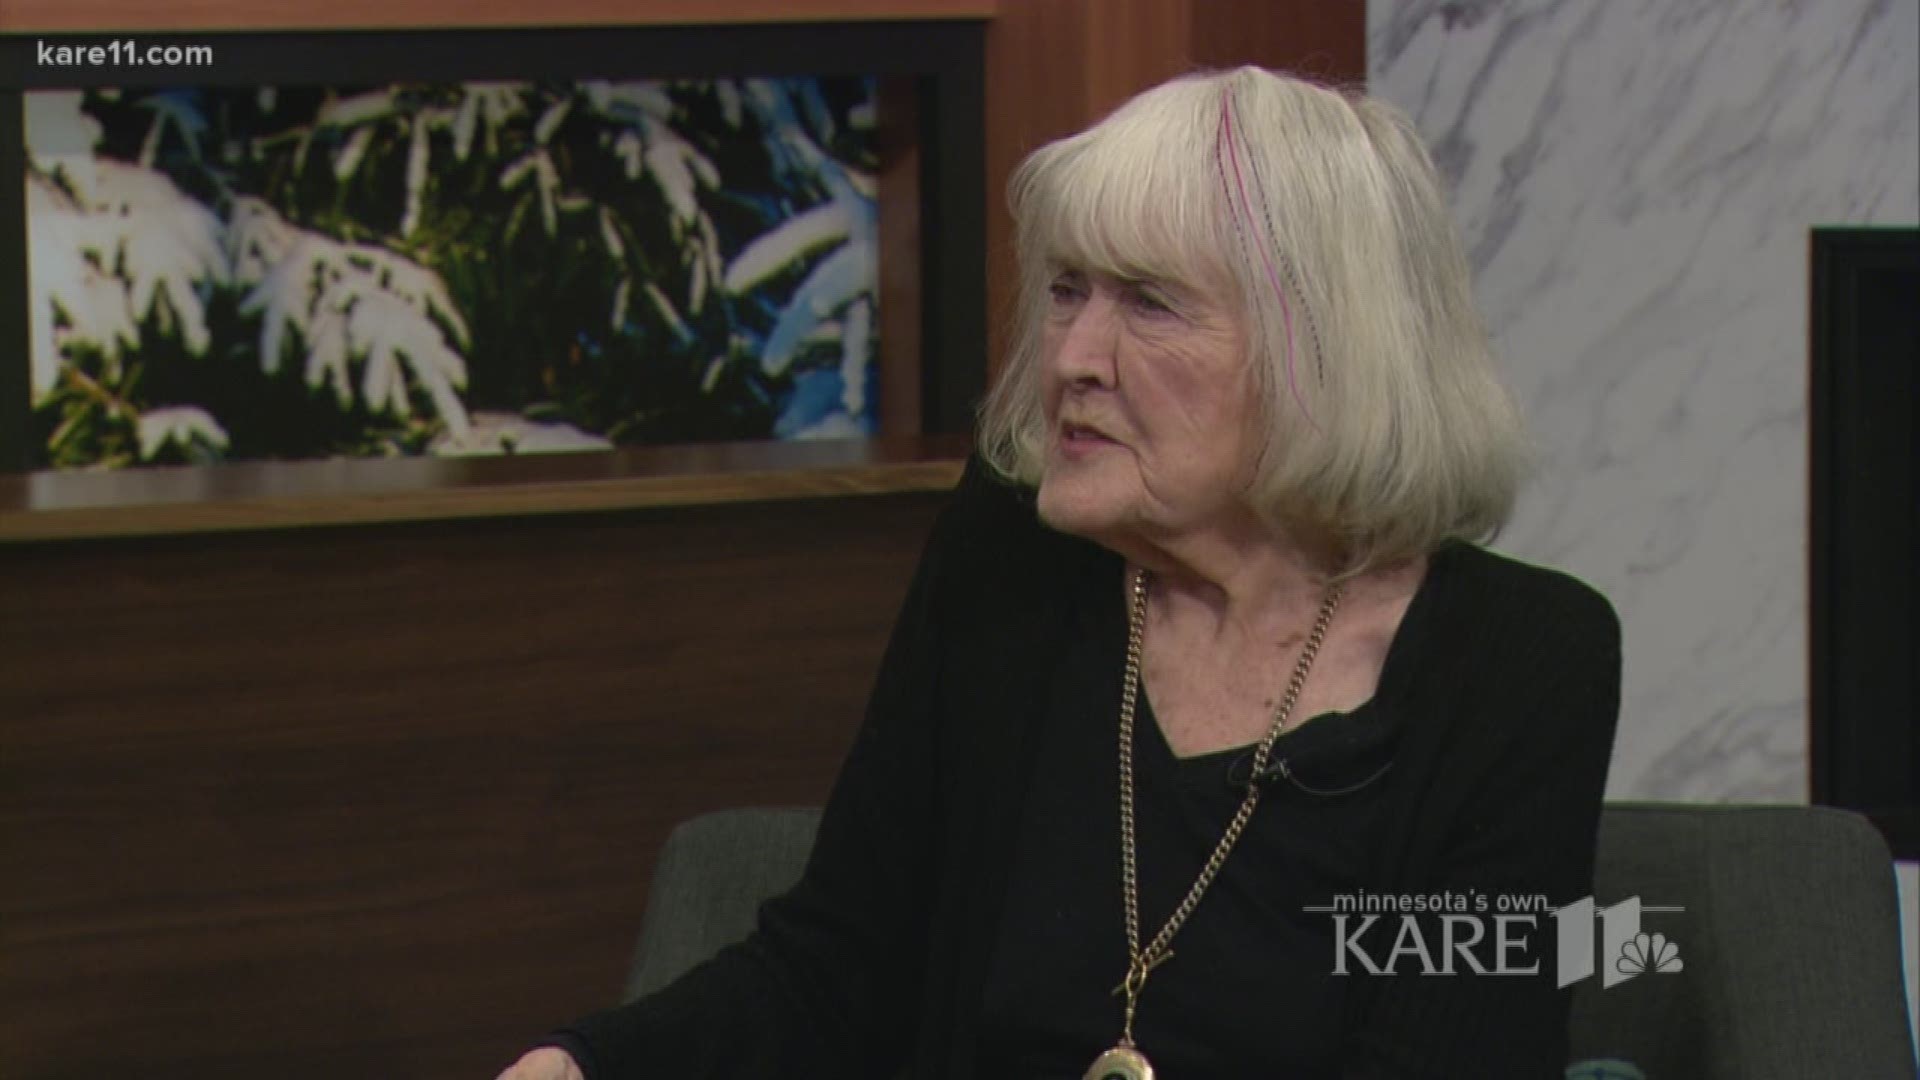 At 95, Joan Kennedy is releasing her fifth book and continuing her message of empowerment to generations of women. https://kare11.tv/2qj5eu0